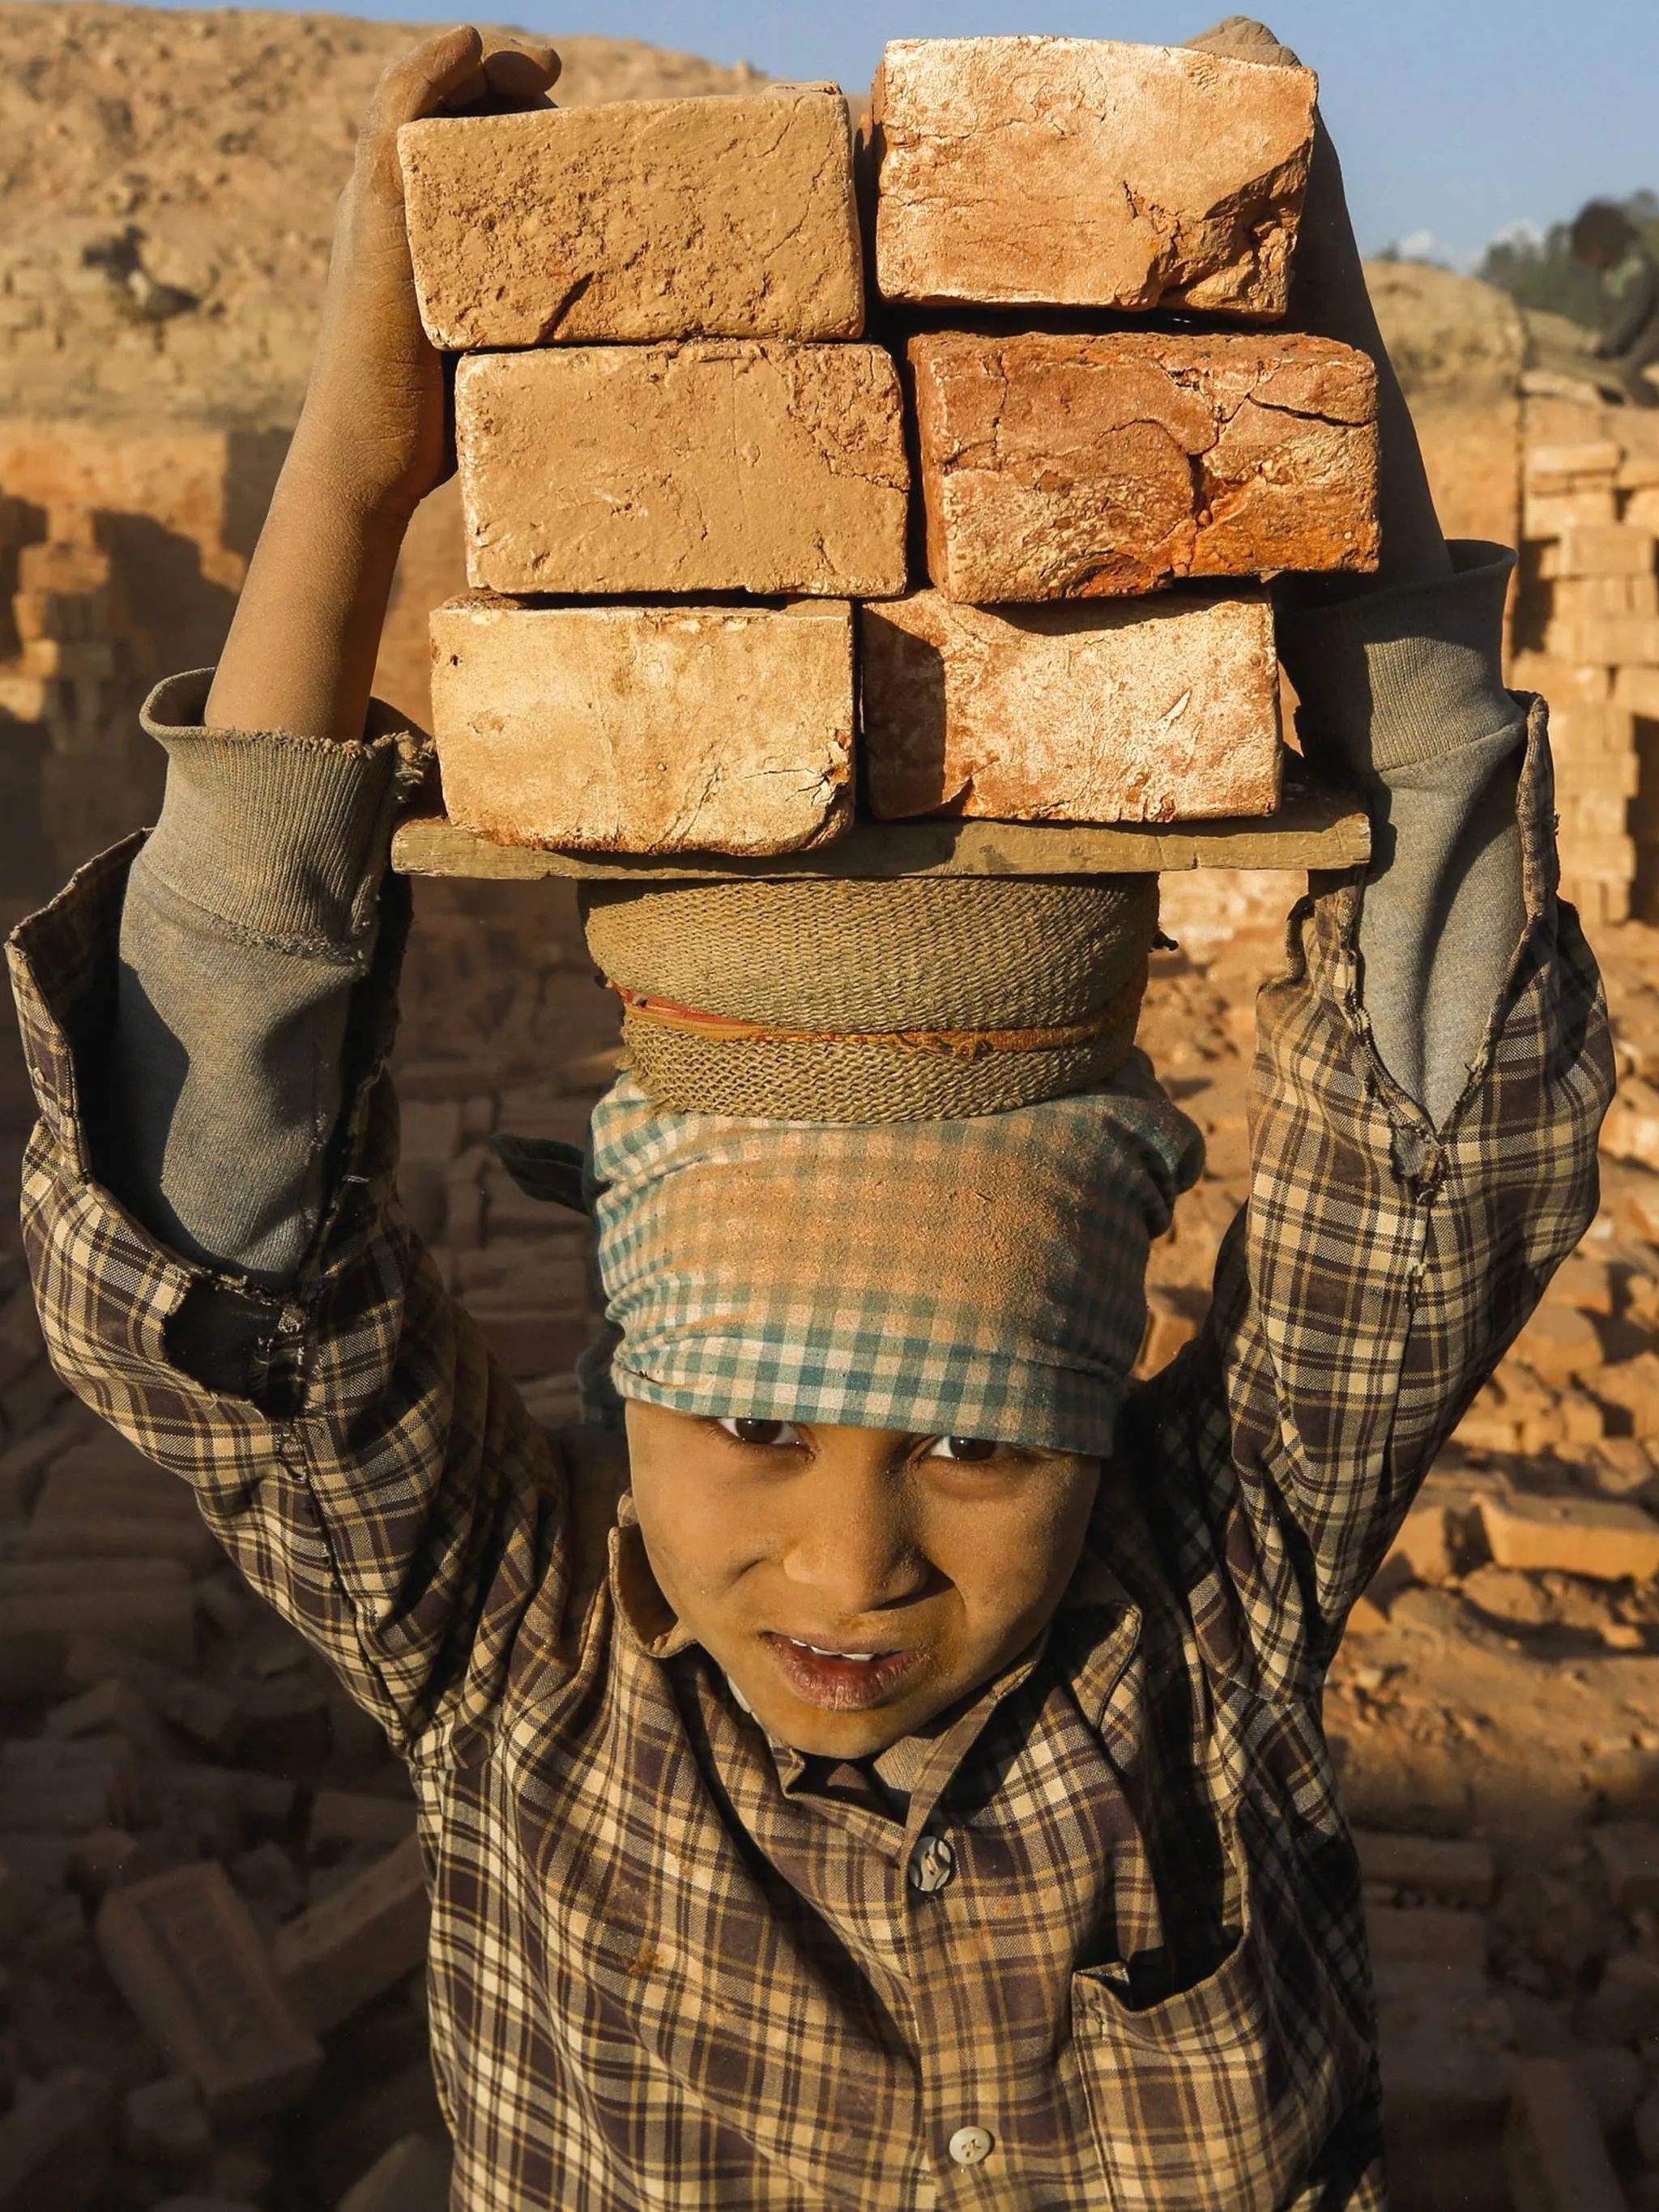 essay on child labour in nepal in 150 words